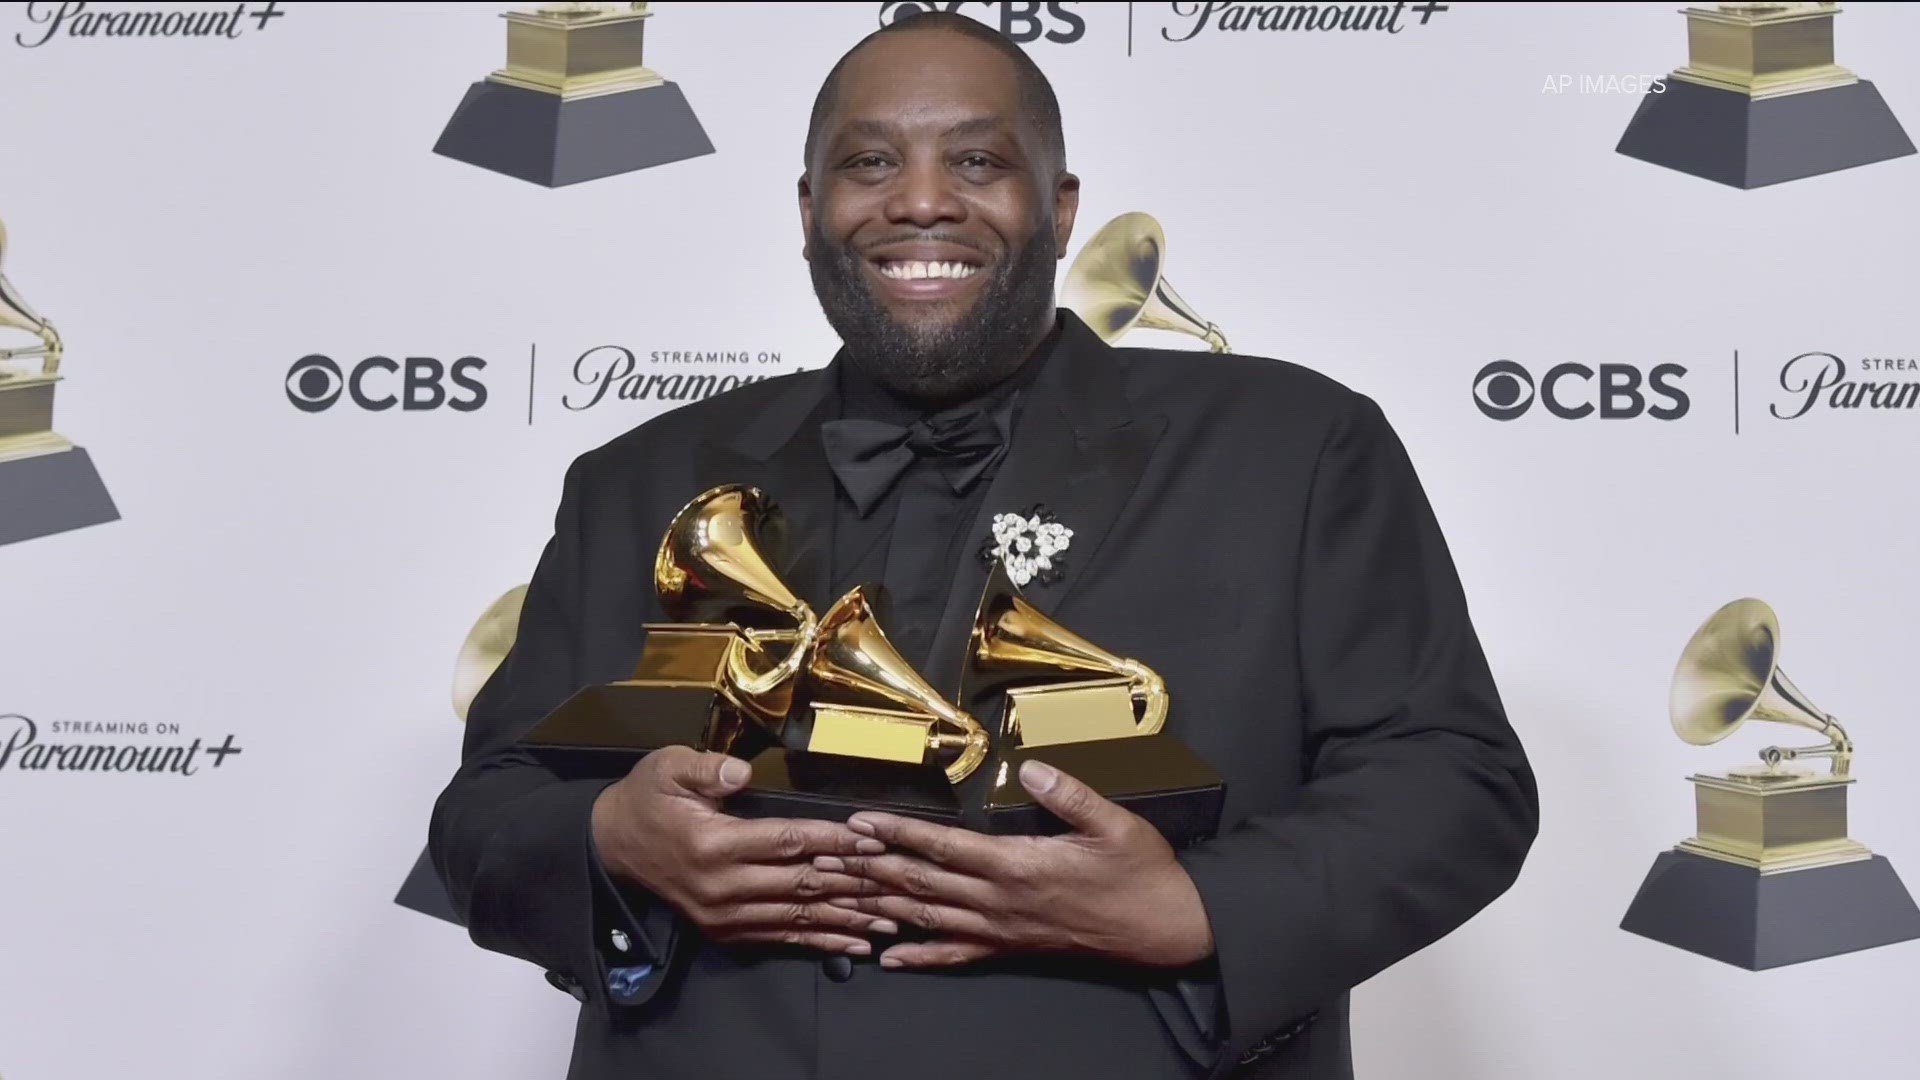 He previously compared winning a Grammy to the likes of a sports championship in the city and spoke about what it would mean to him and Atlanta as a whole.